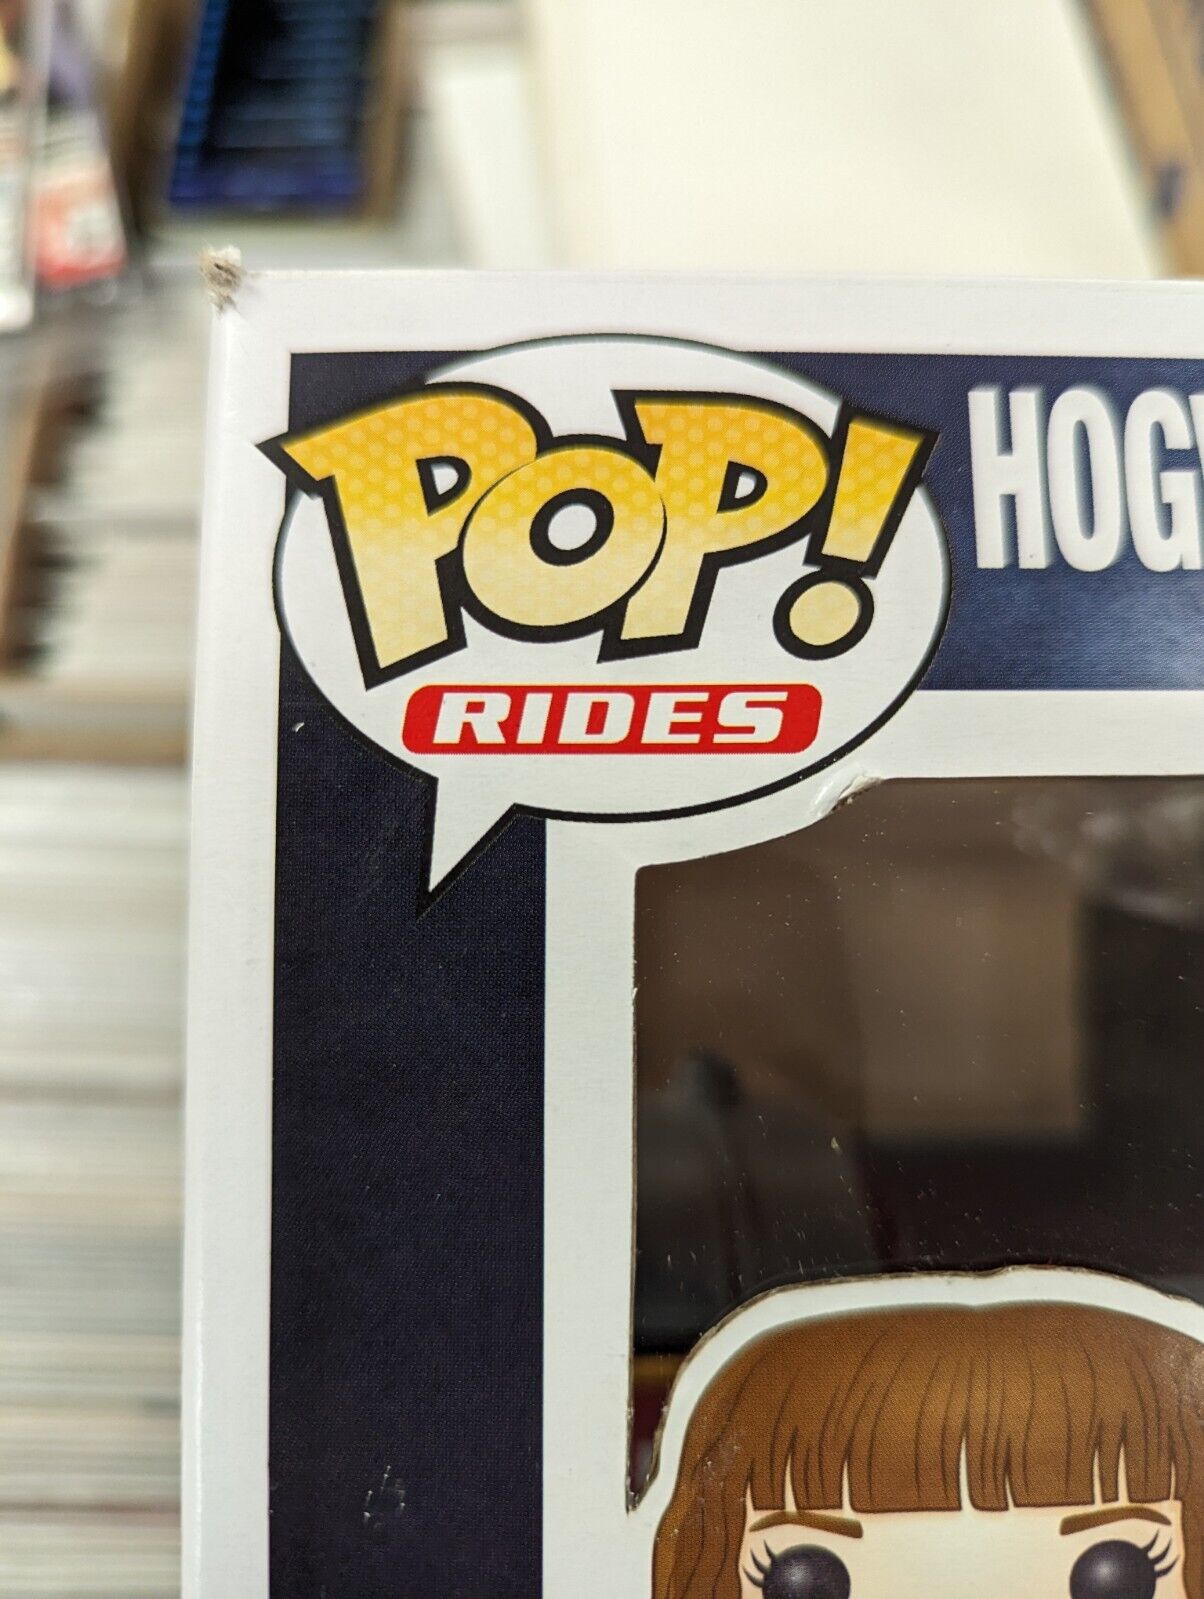 Funko Pop Hogwarts Express Carriage With Hermione Granger 22 Harry Potter